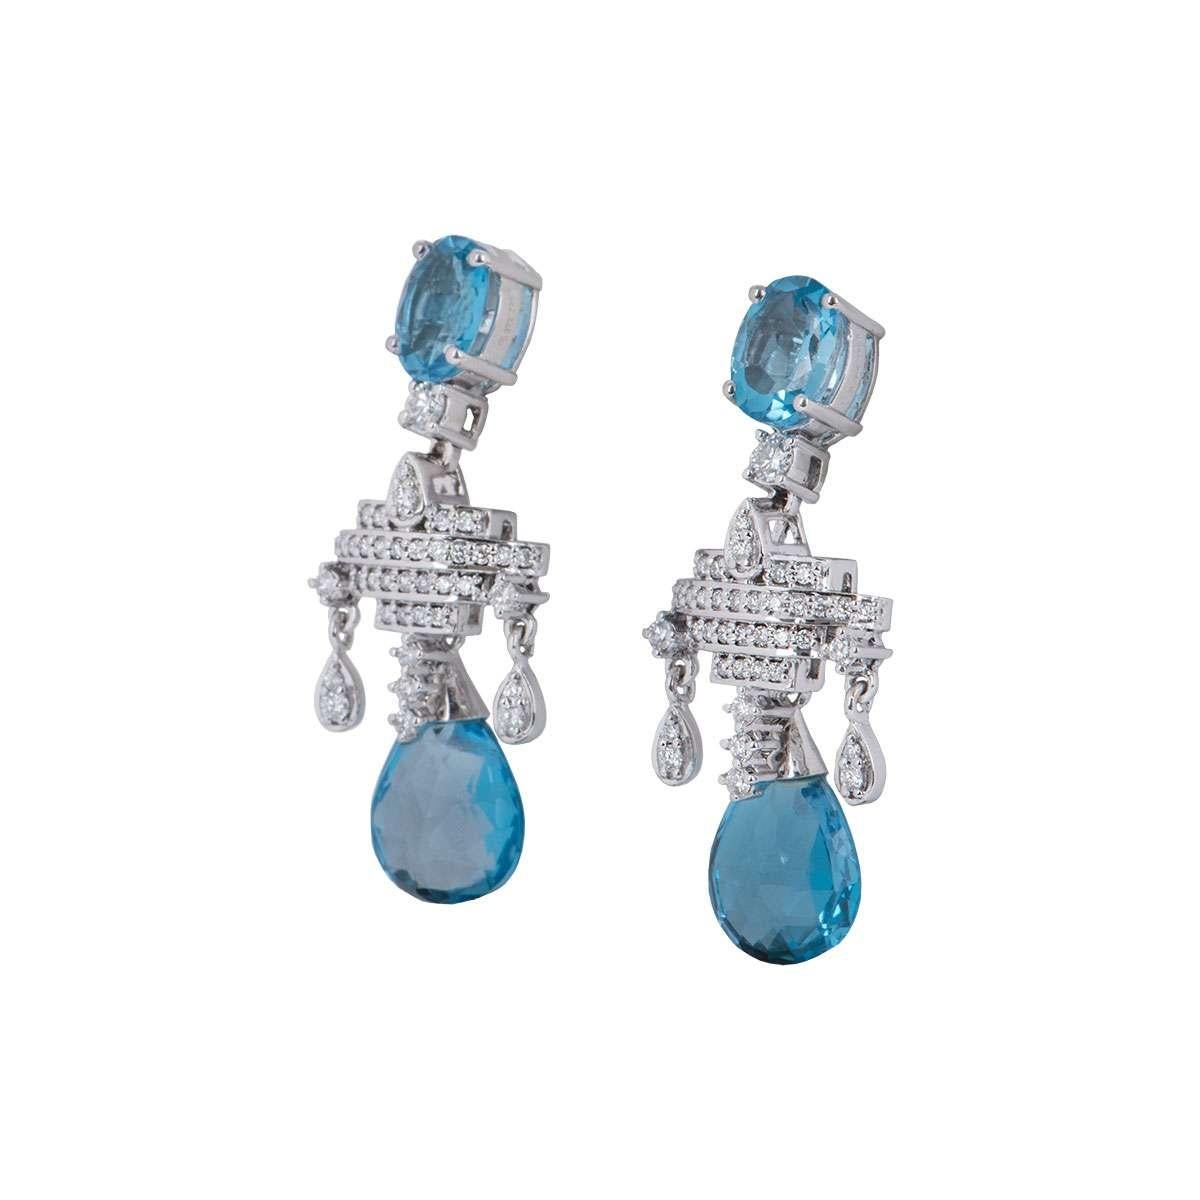 A pair of 18k white gold diamond and aquamarine drop earrings. Each earring is formed of an oval cut aquamarine followed by a diamond set abstract motif, which is then complemented by a detachable briolette cut aquamarine. The aquamarines have a